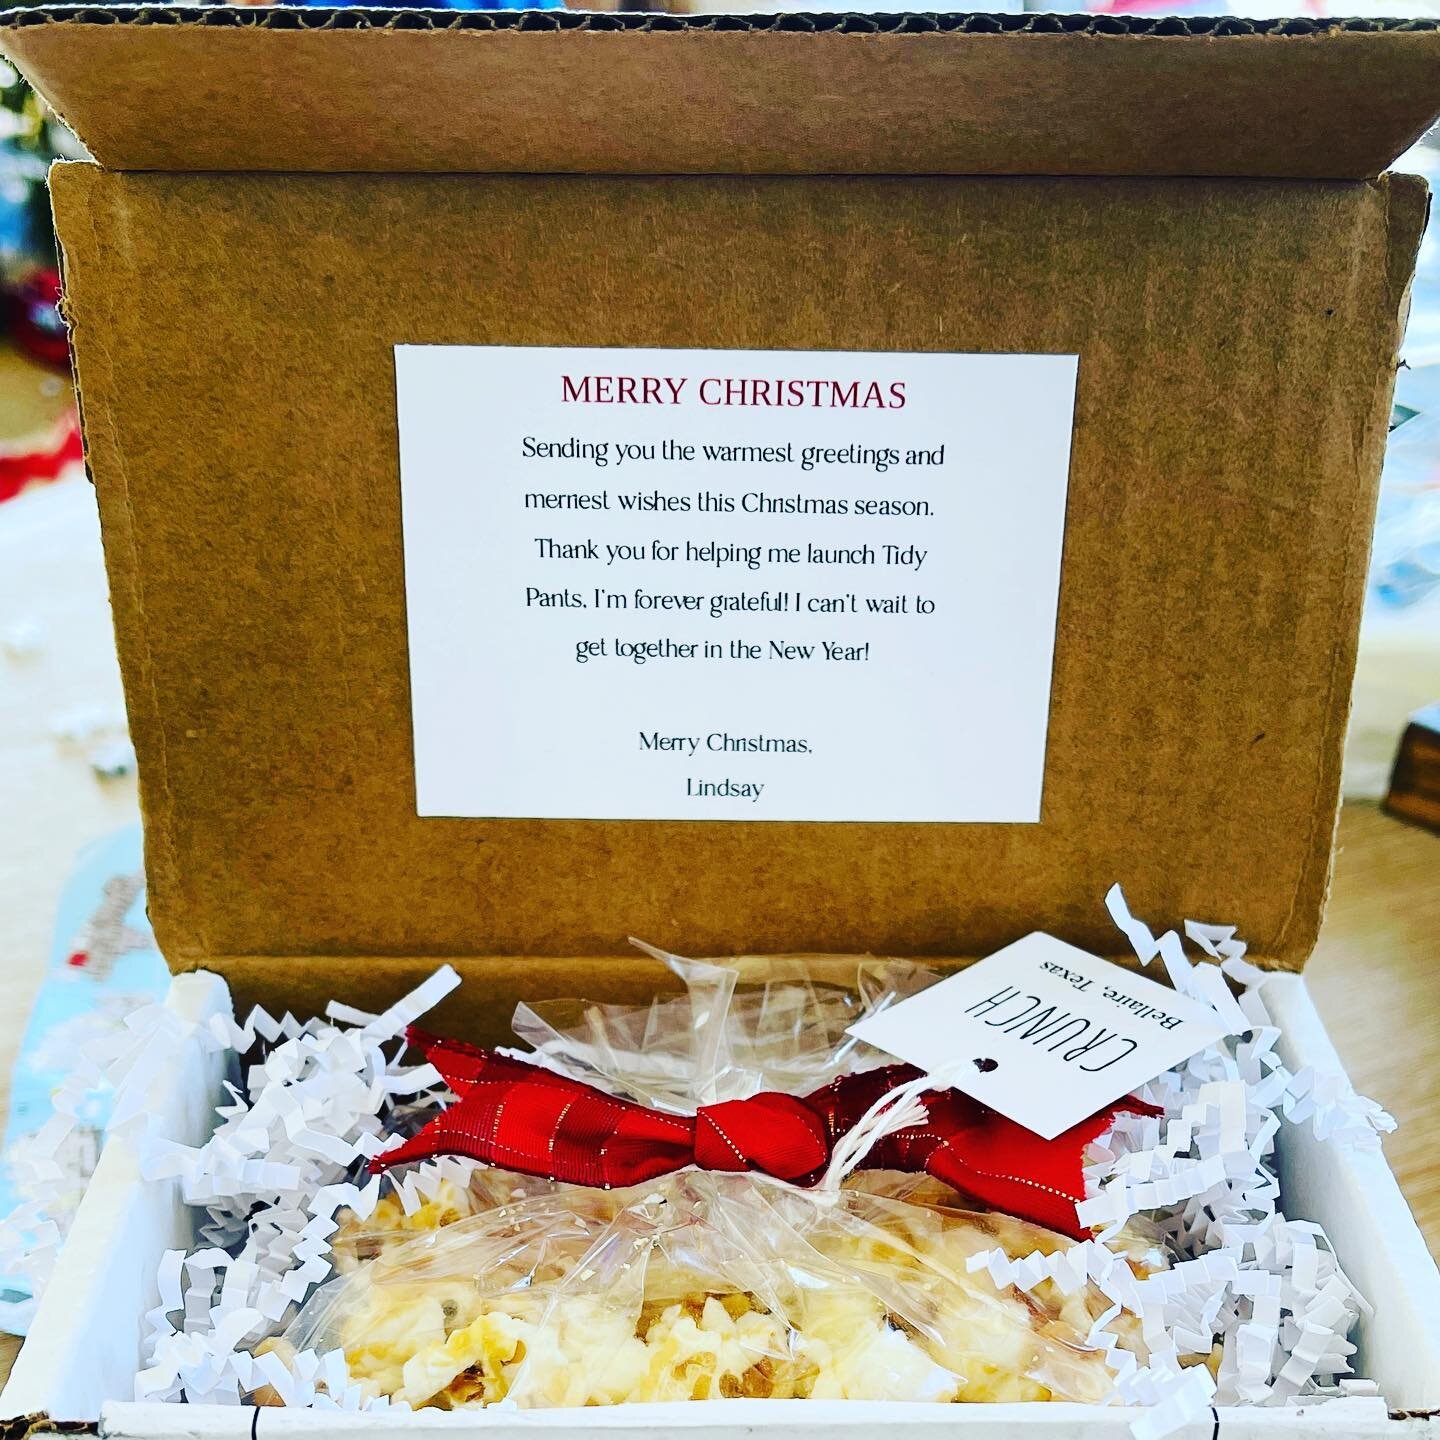 Sweet (&amp; salty) gift 🎁 from generous @tidy.pants put together by @basketcasehtx. I&rsquo;m always on the hunt for clever ways to show appreciation. How cute is this?!